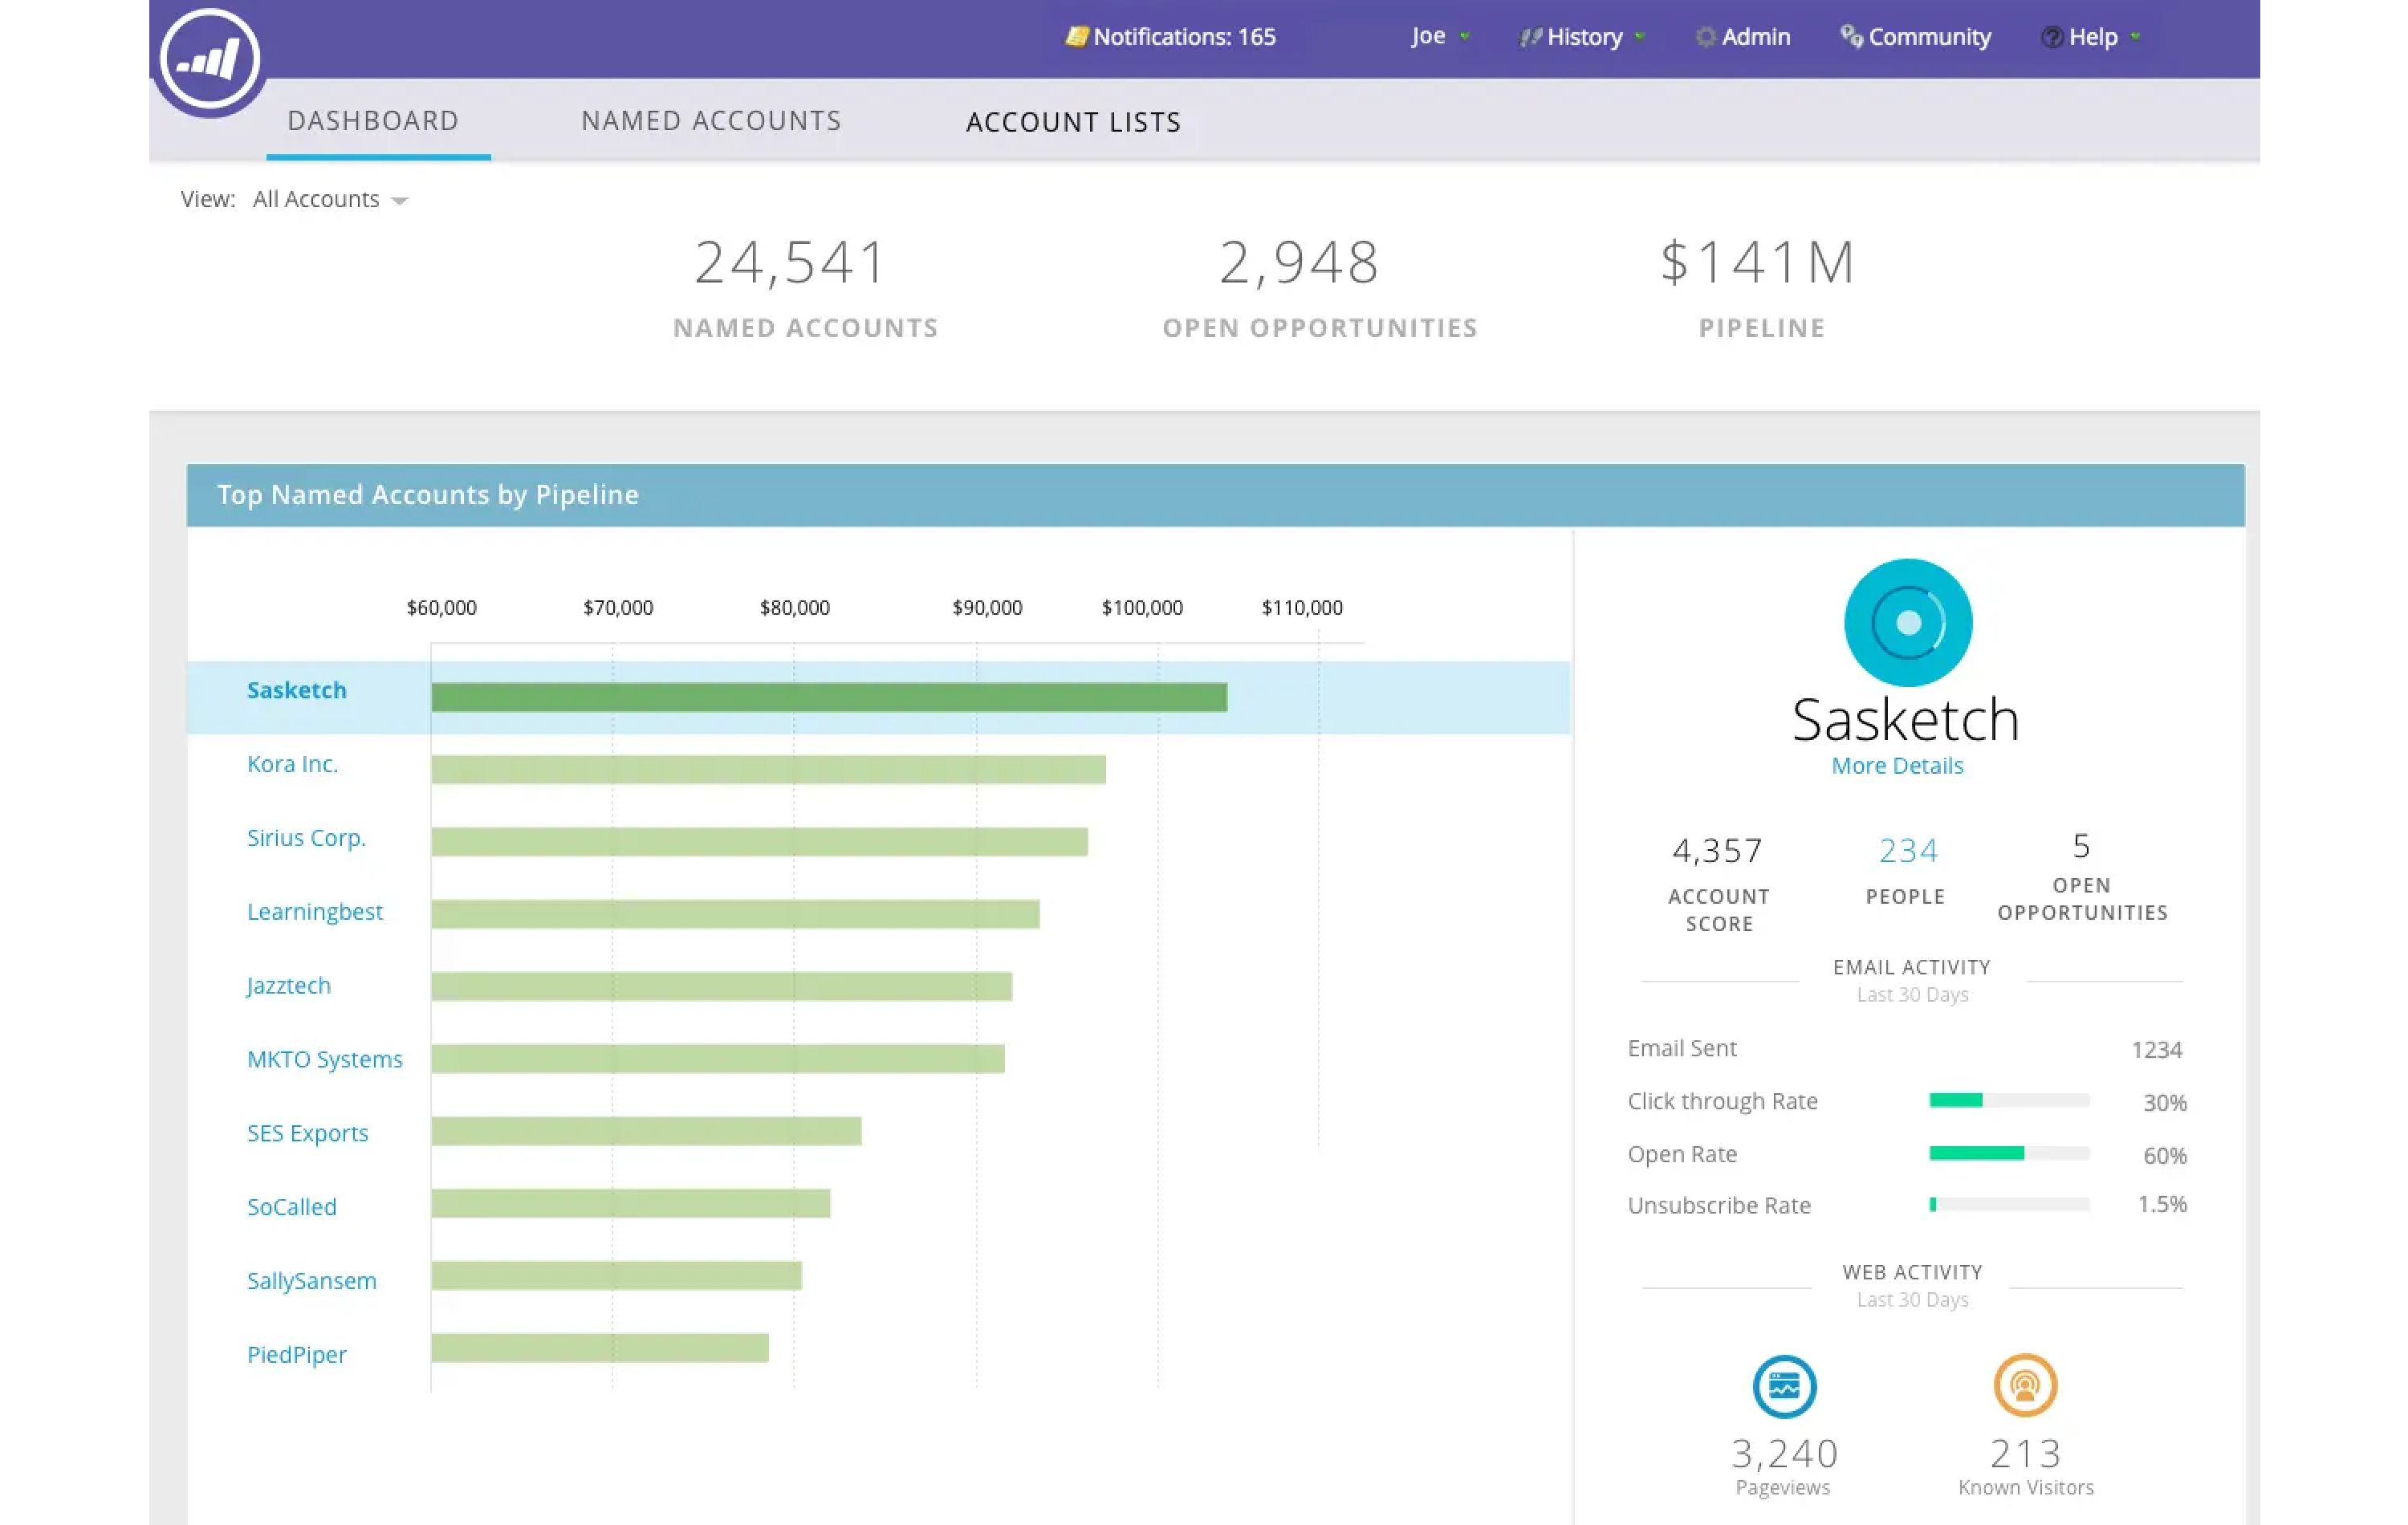 Marketo Engage - Best for Marketing Automation and Lead Management